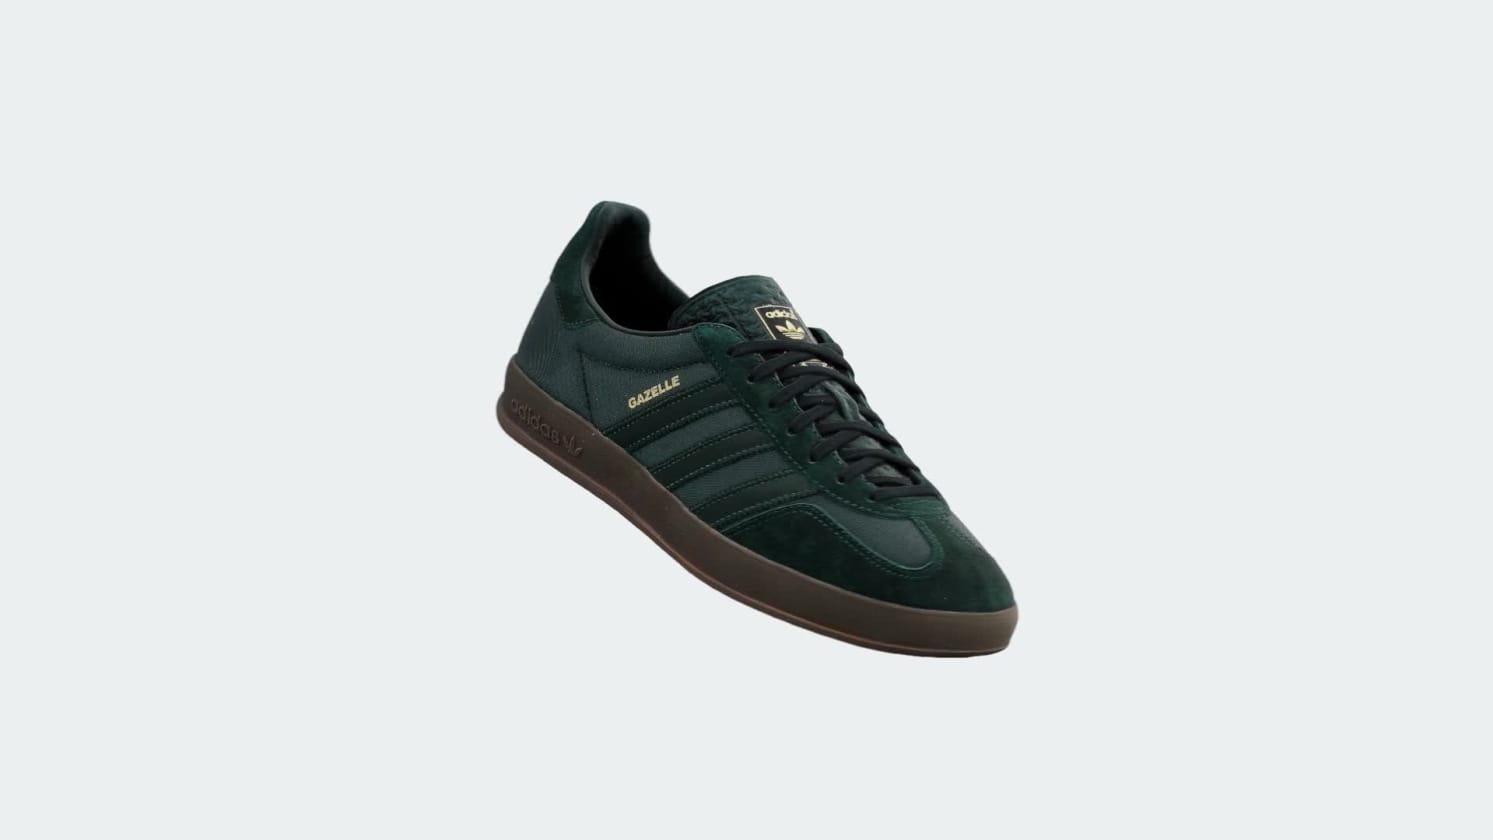 luge Displacement Prelude adidas Gazelle Indoor Shoes - Green | Men's Lifestyle | adidas US